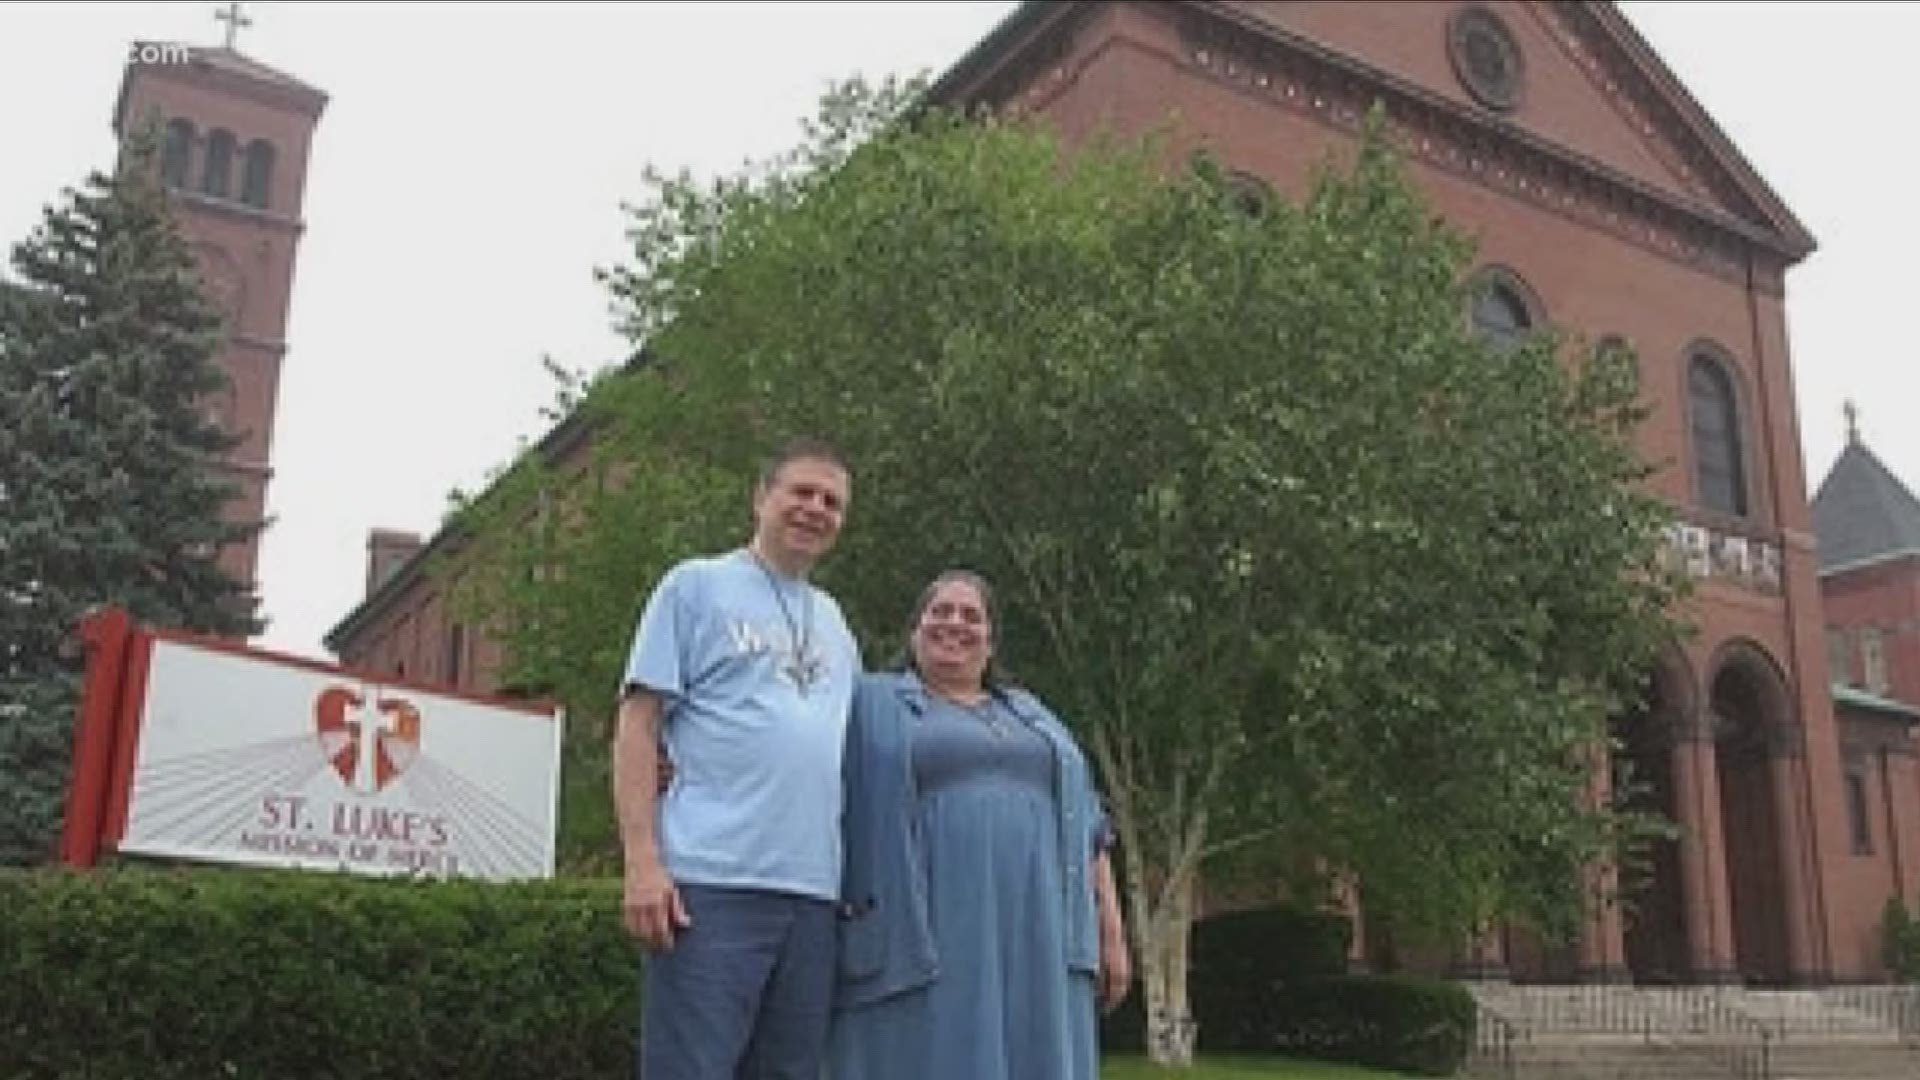 WNY is remembering the life of the man who co-founded St. Luke's Mission of Mercy on Buffalo's East Side.